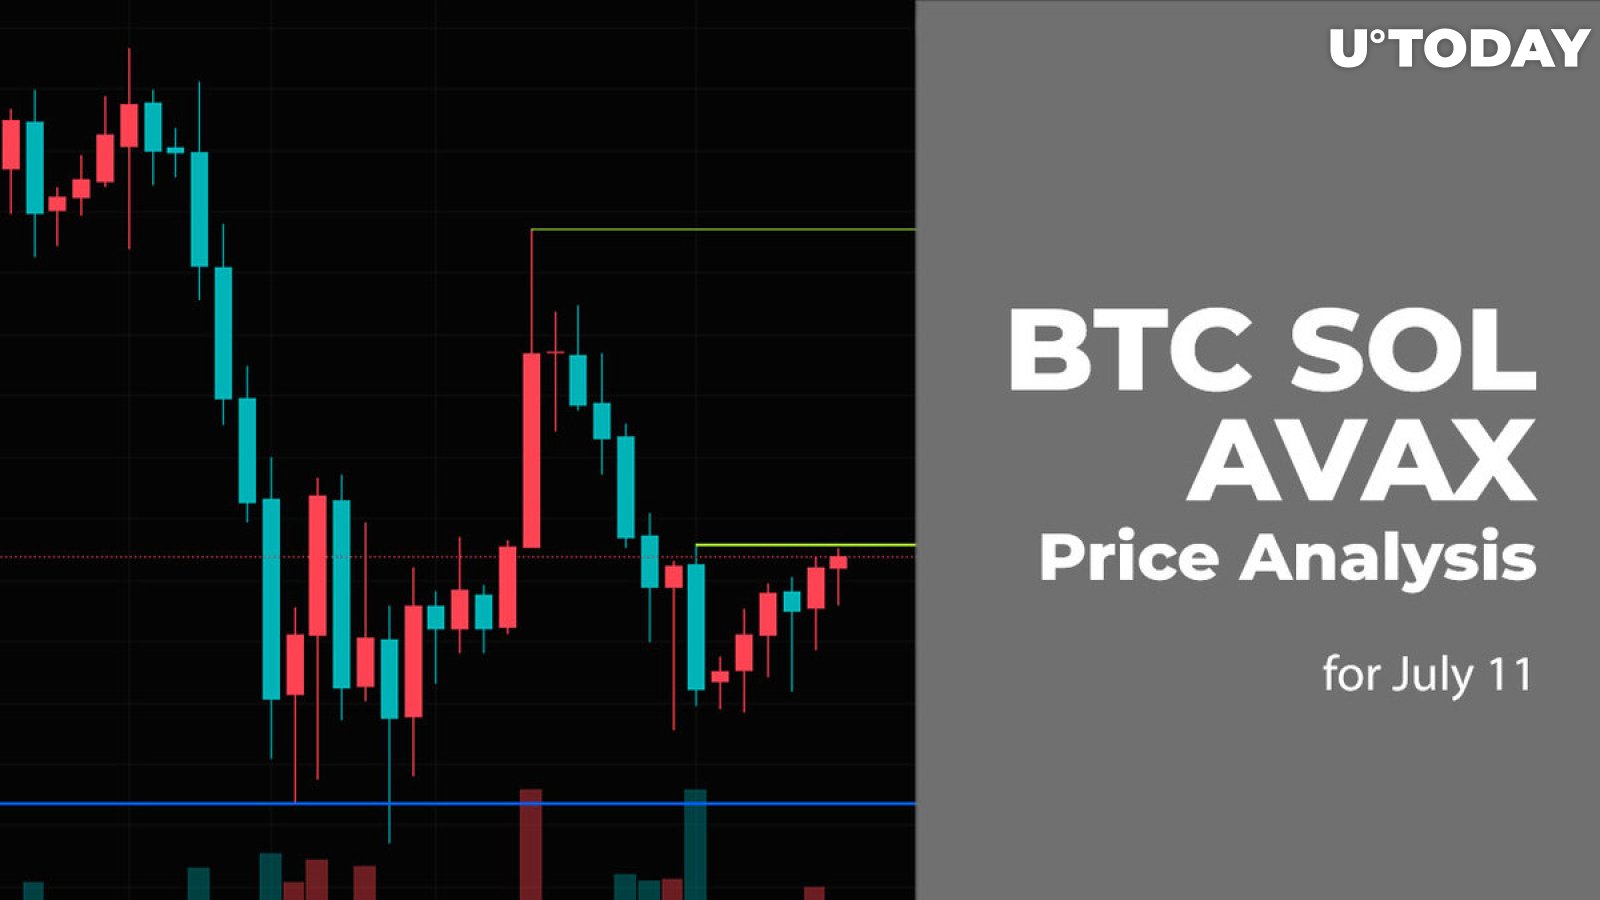 BTC, SOL and AVAX Price Analysis for July 11